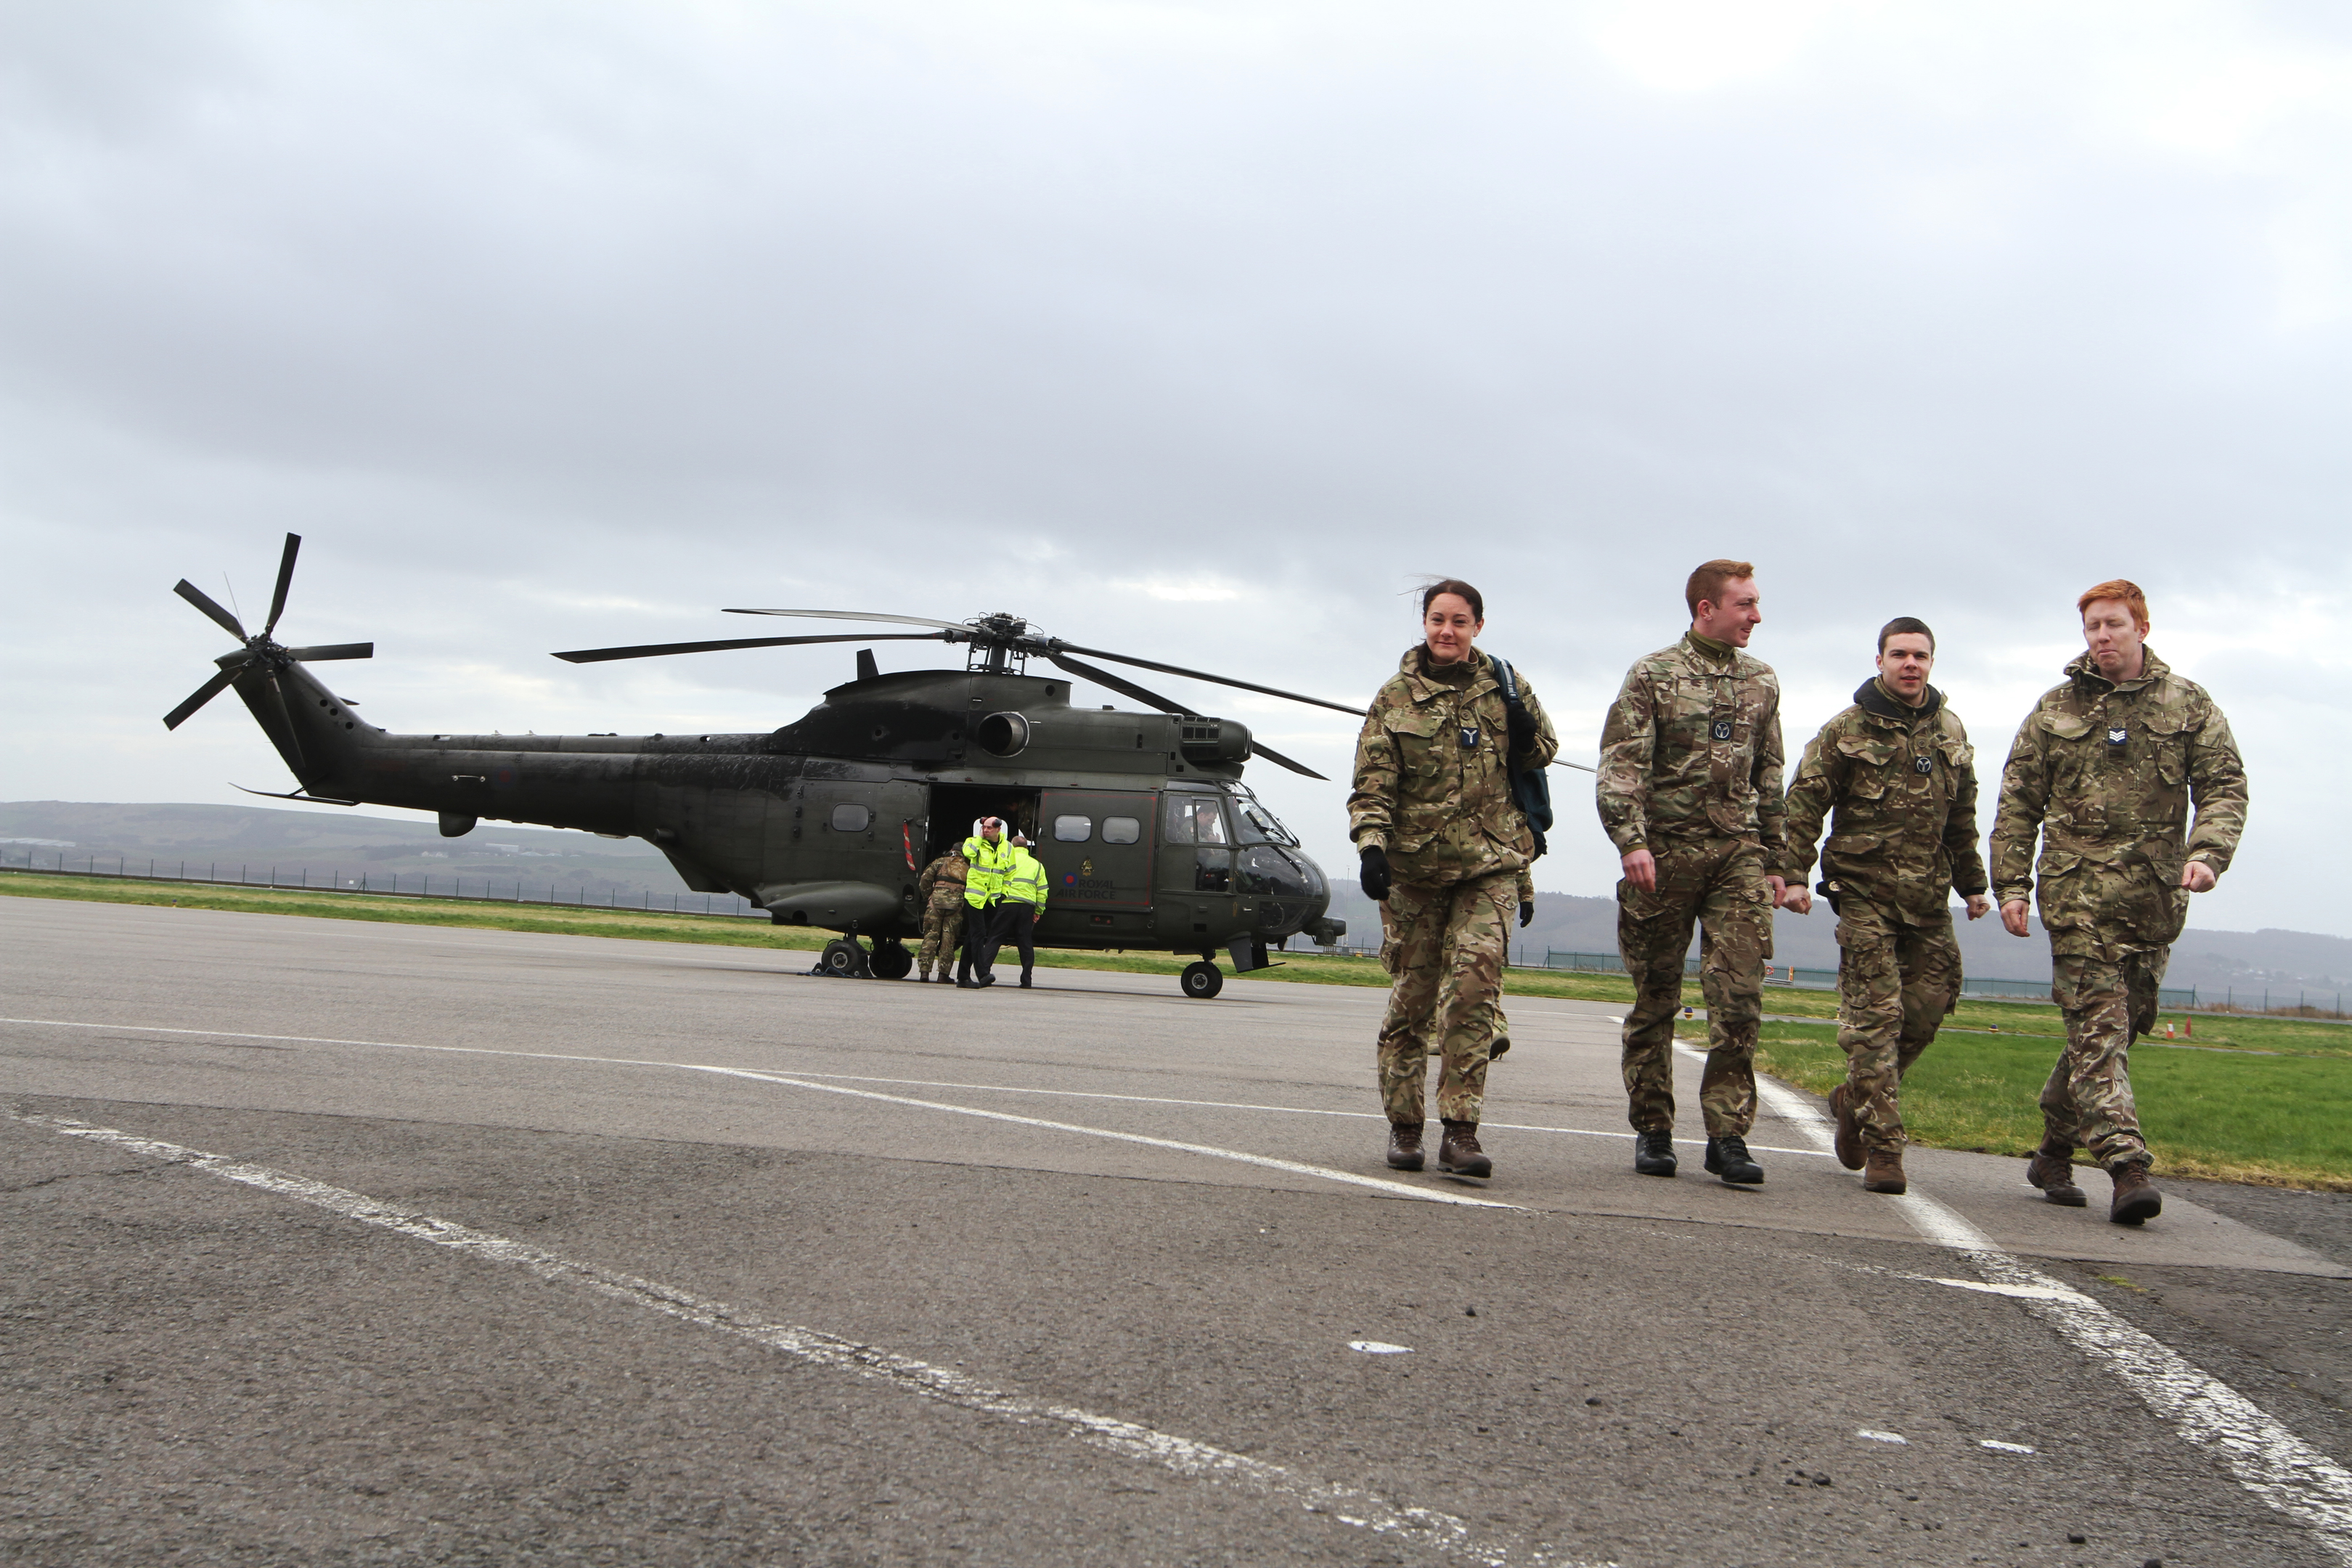 A Royal Air Force Puma Helicopter landing at Dundee Airport.